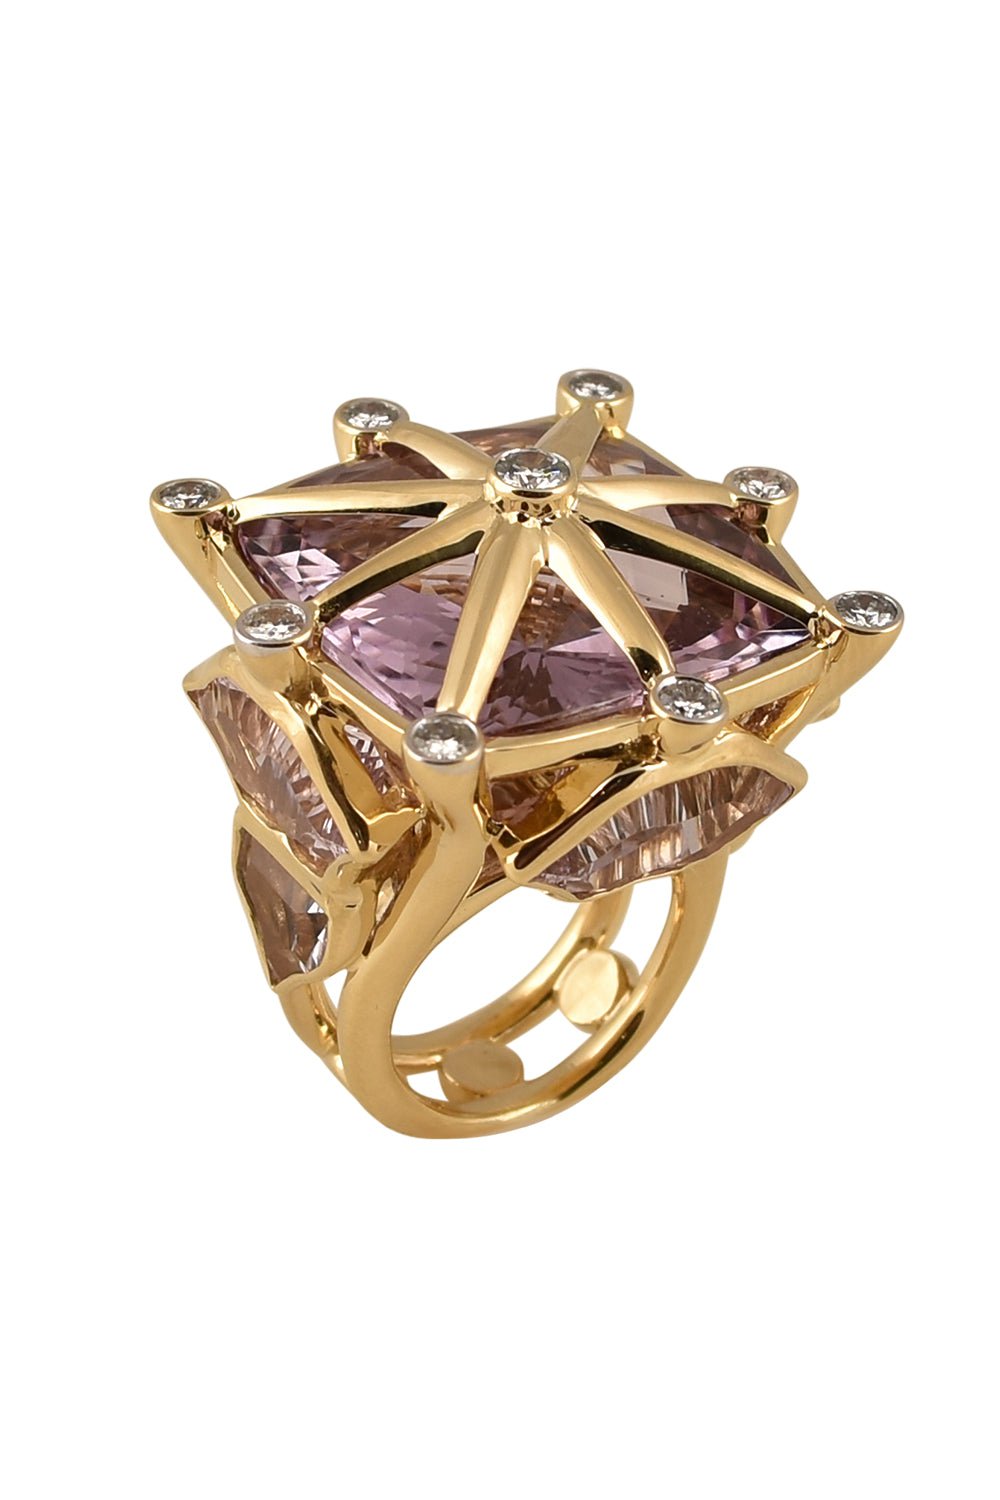 Pink Amethyst Royalty Crown Ring JEWELRYFINE JEWELRING TONY DUQUETTE   